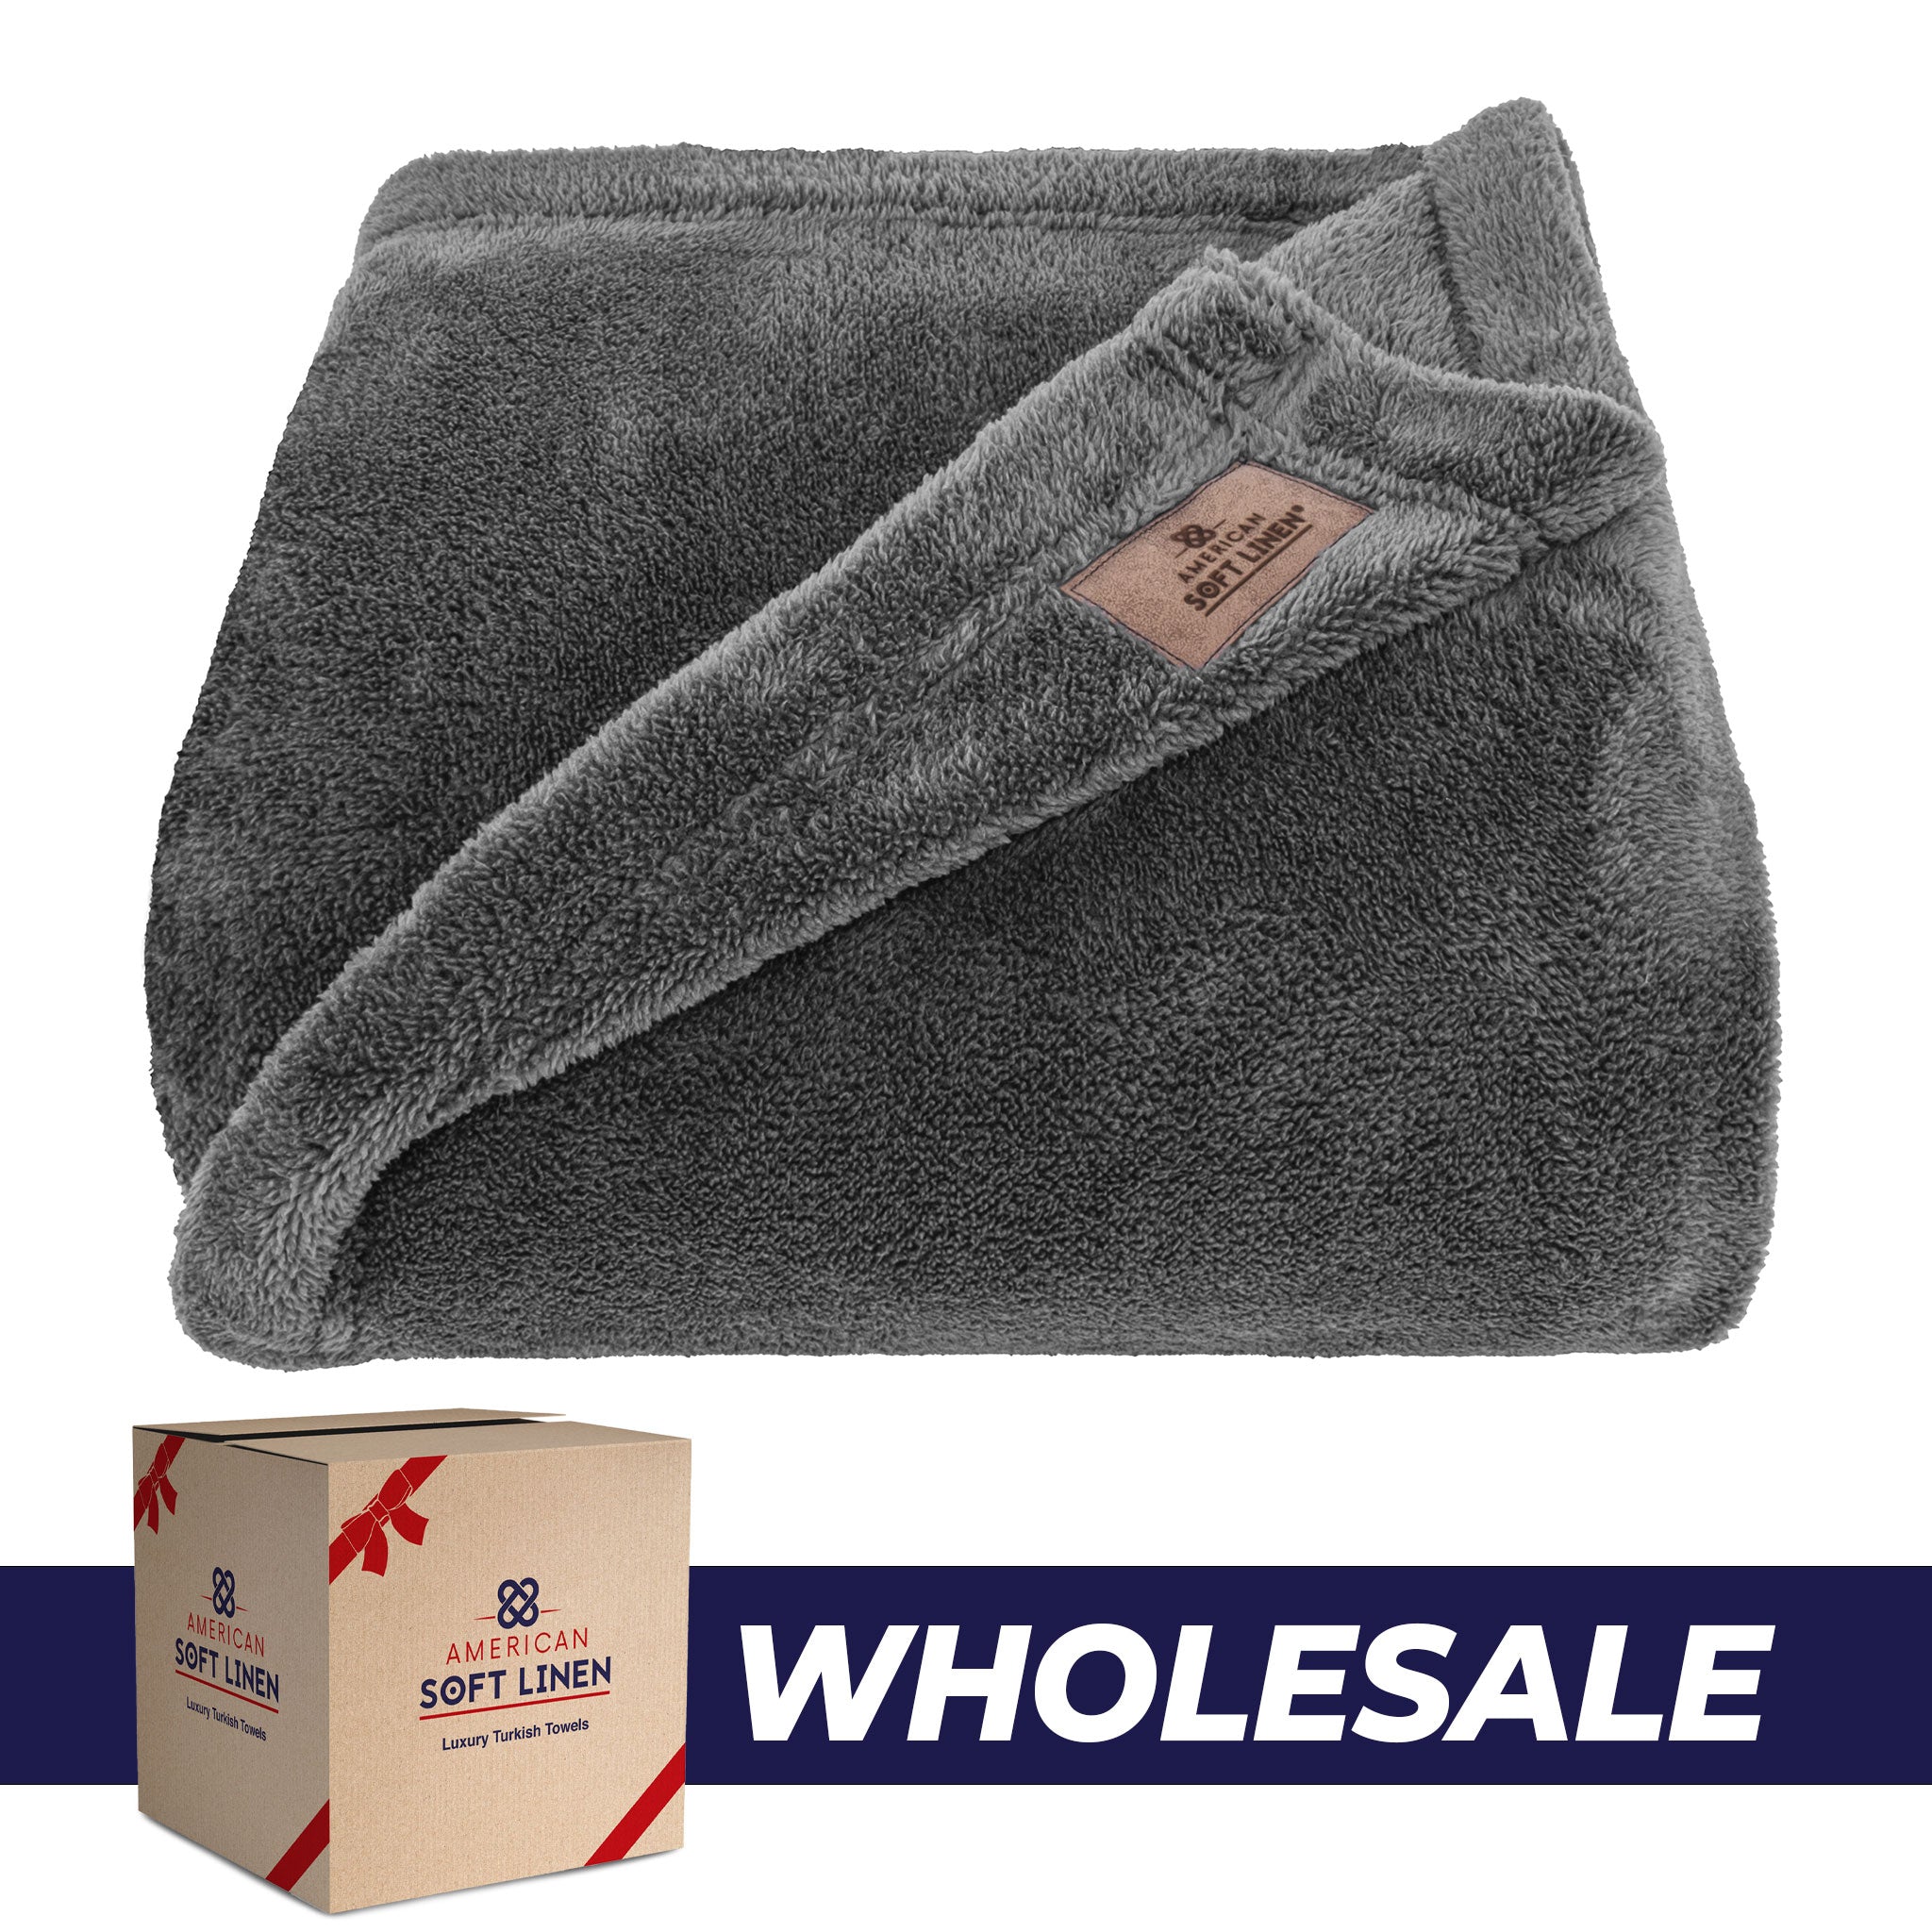 American Soft Linen - Bedding Fleece Blanket - Wholesale - 15 Set Case Pack - Twin Size 60x80 inches - Gray - 0